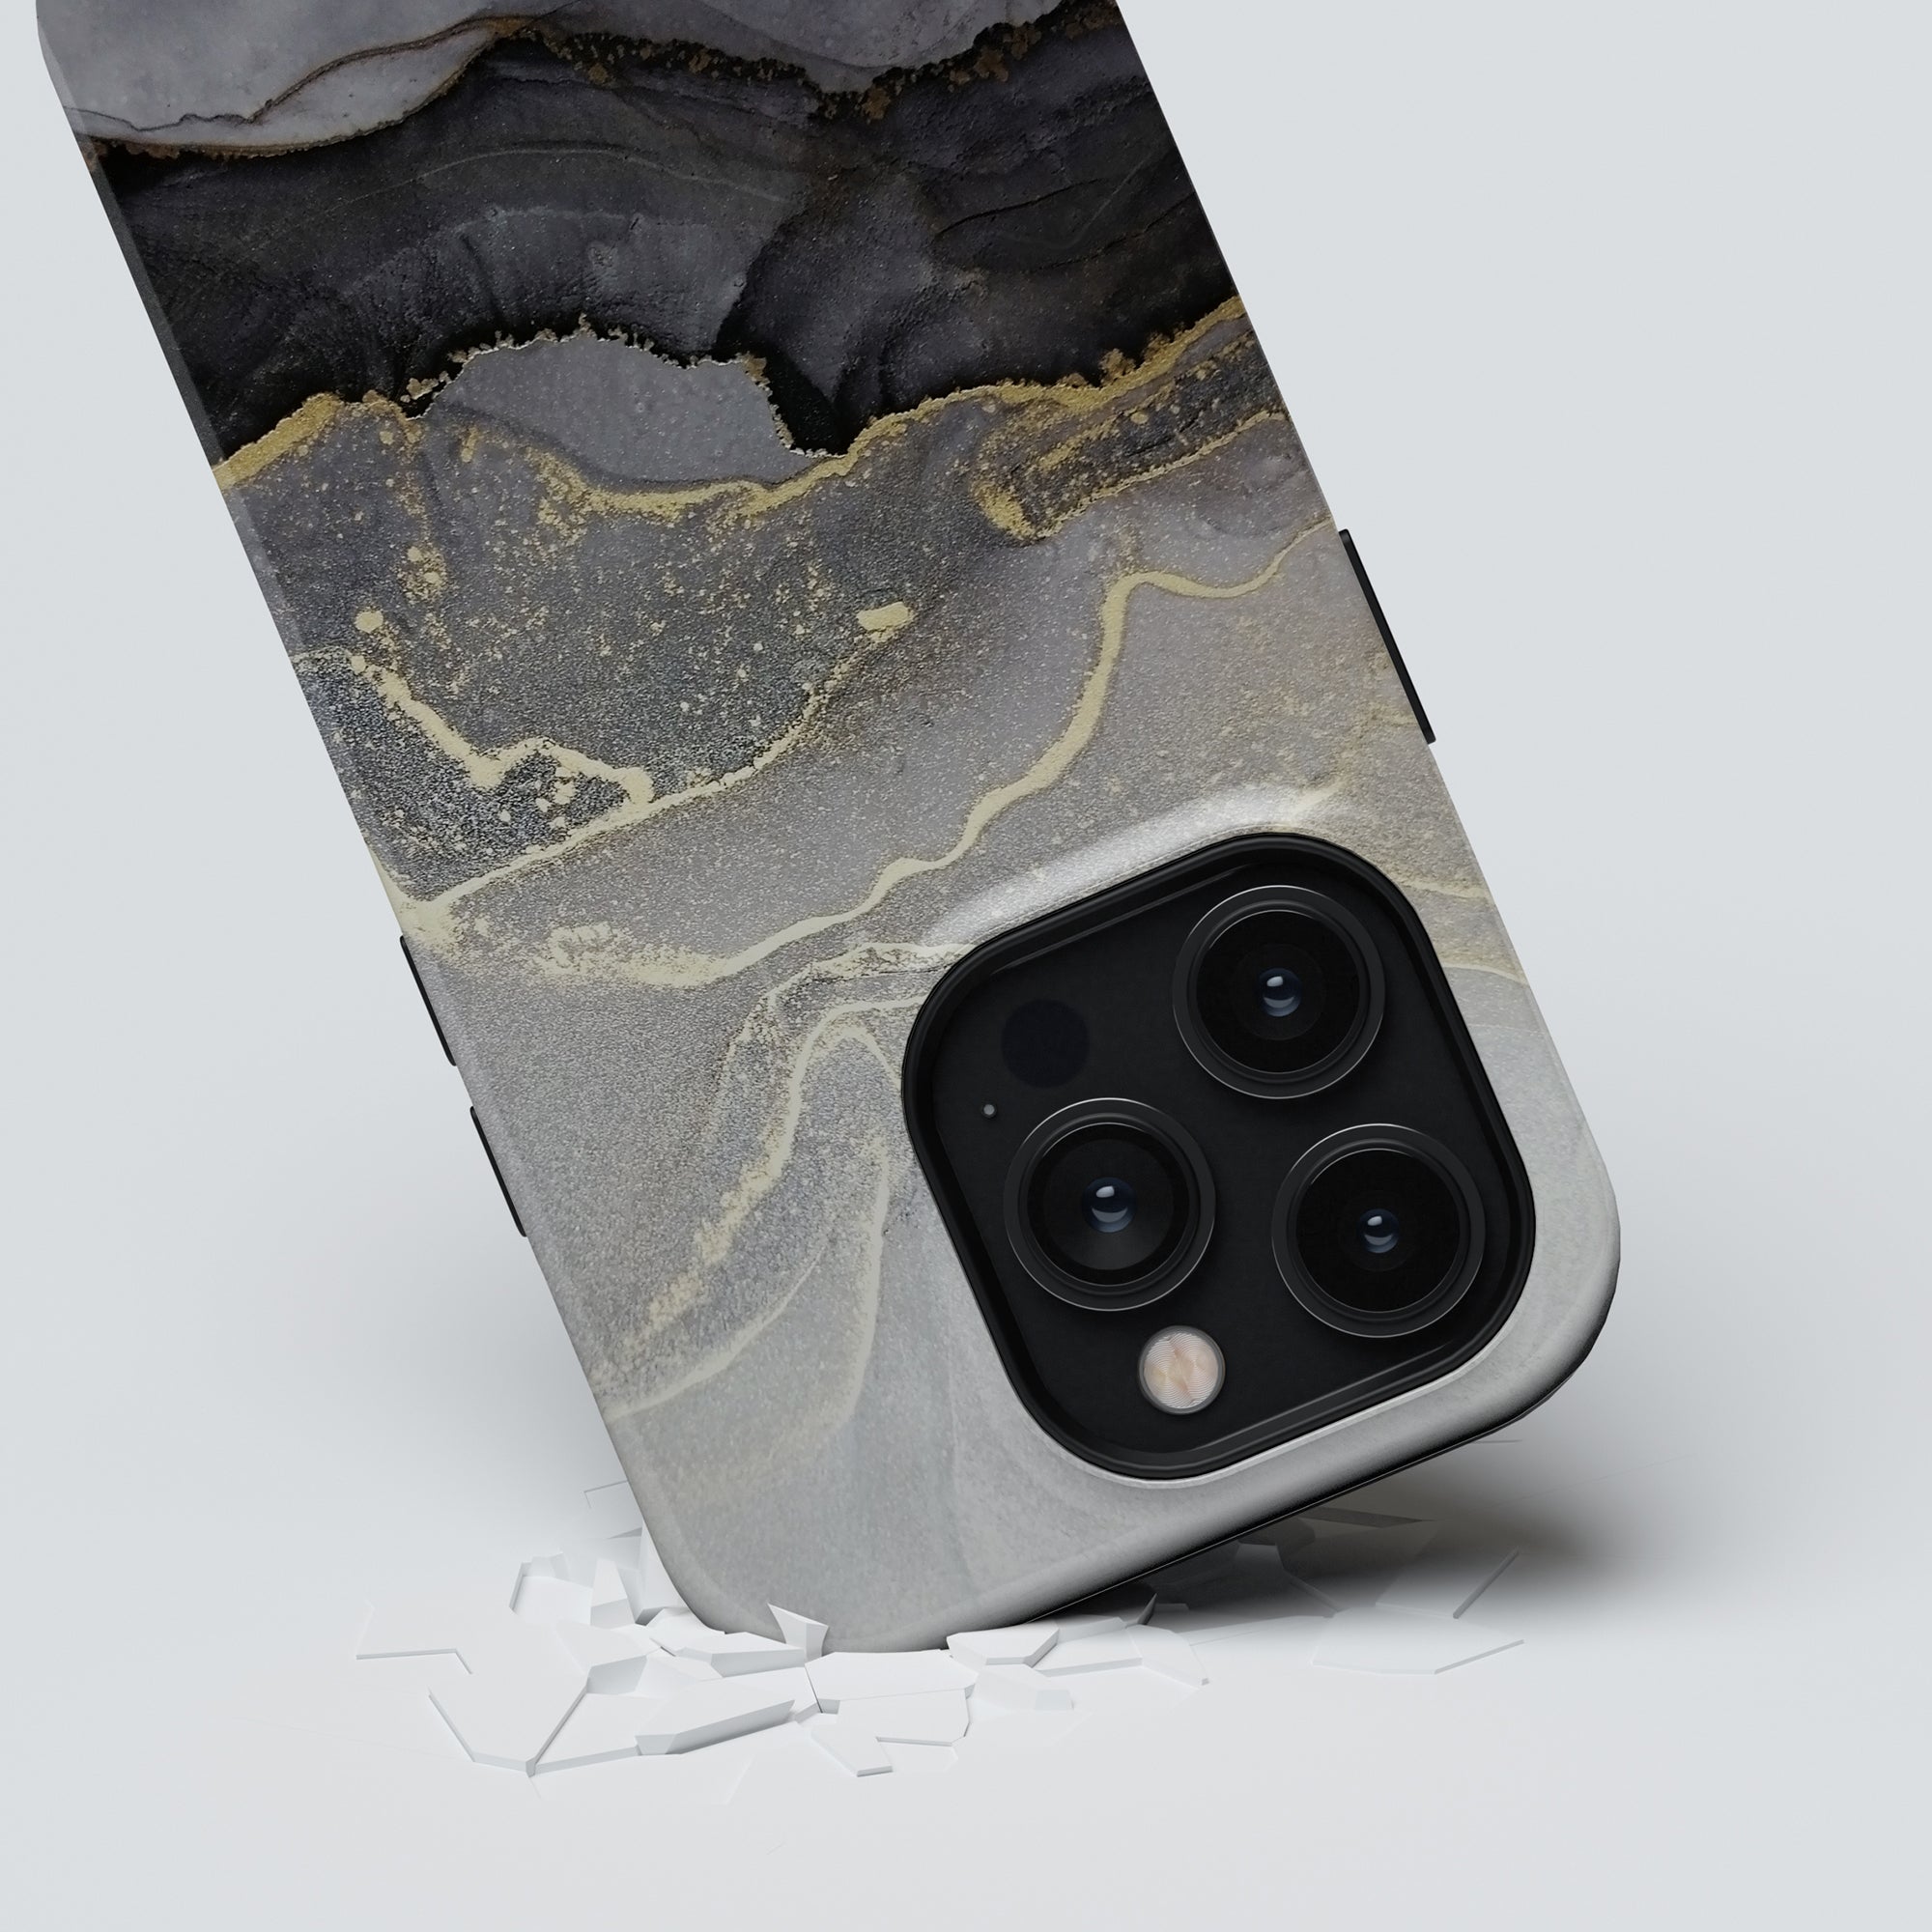 Roar Swedens black and gold marble case for the iphone 11 pro, a mobilskyddsfavorit, with a touch of Sparkle - Tough Case.